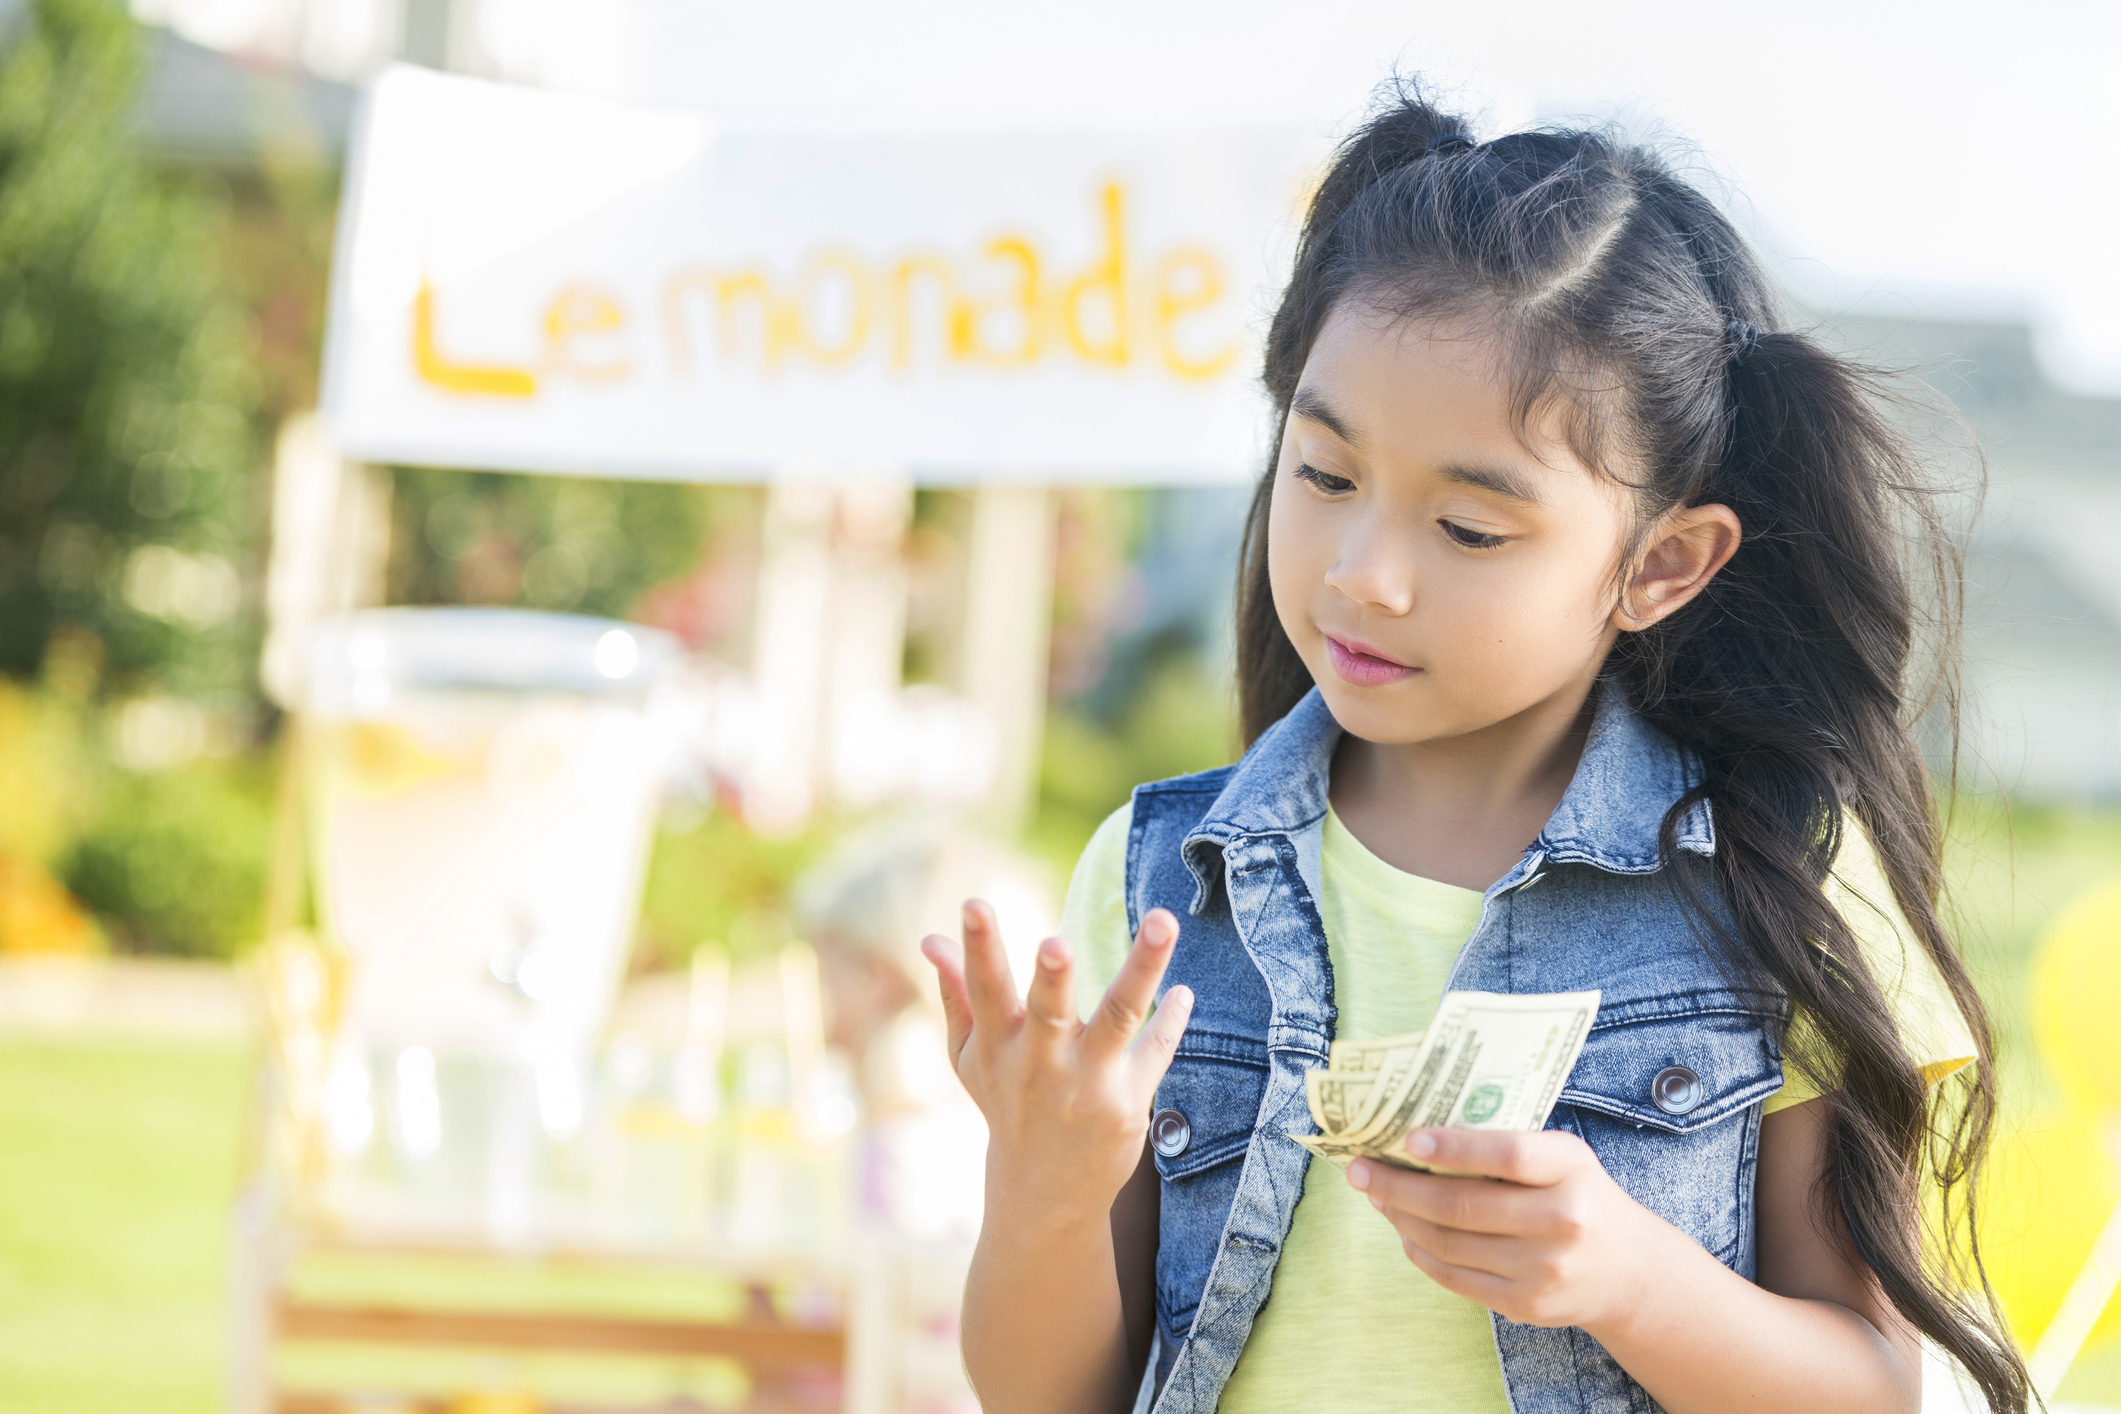 Little girl counting proceeds from sales